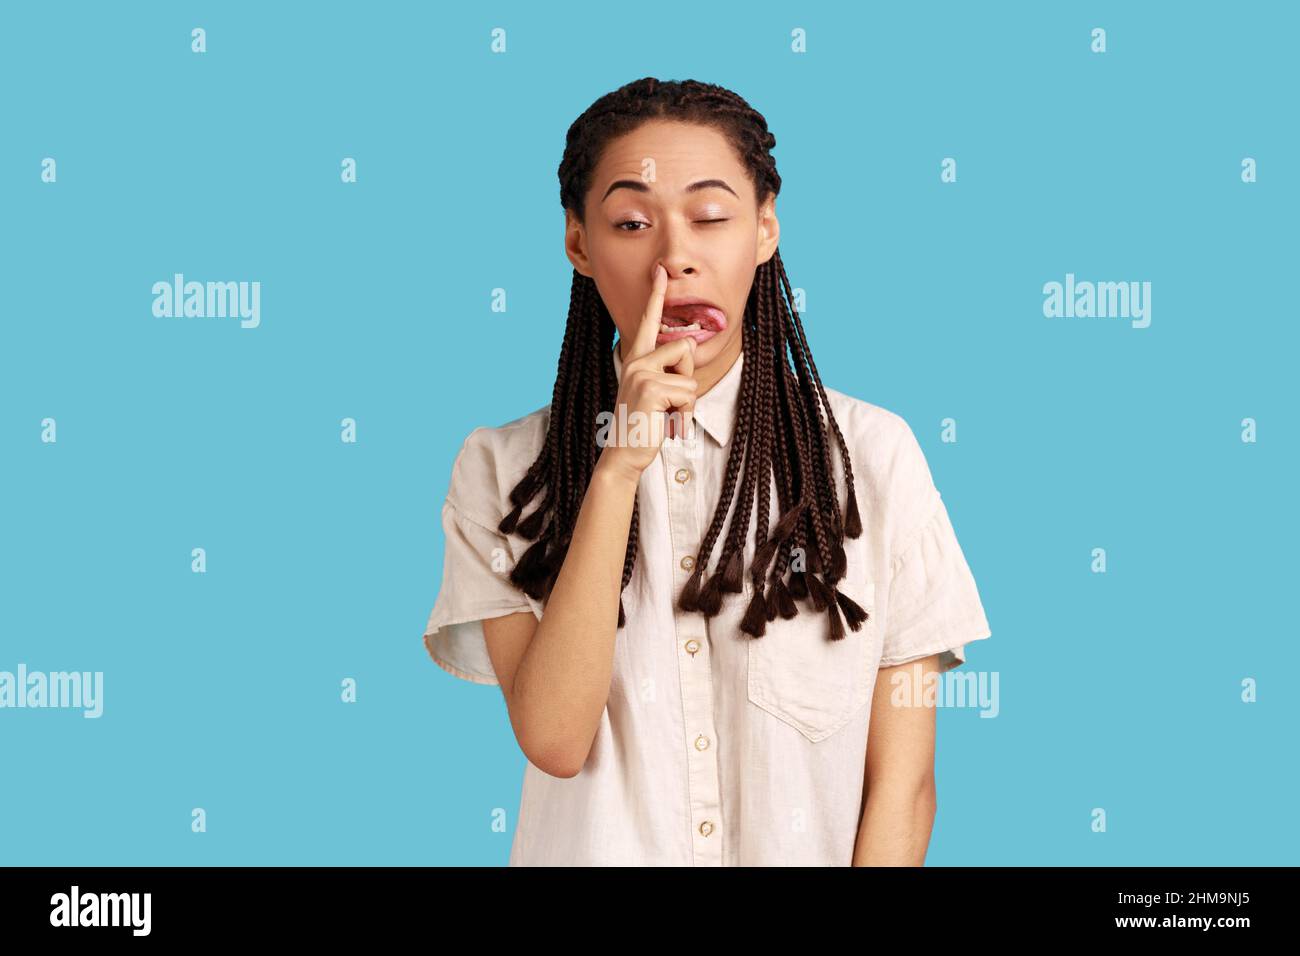 Portrait of funny impolite woman with black dreadlocks making crazy face with tongue out and picking her nose, bad manners, wearing white shirt. Indoor studio shot isolated on blue background. Stock Photo